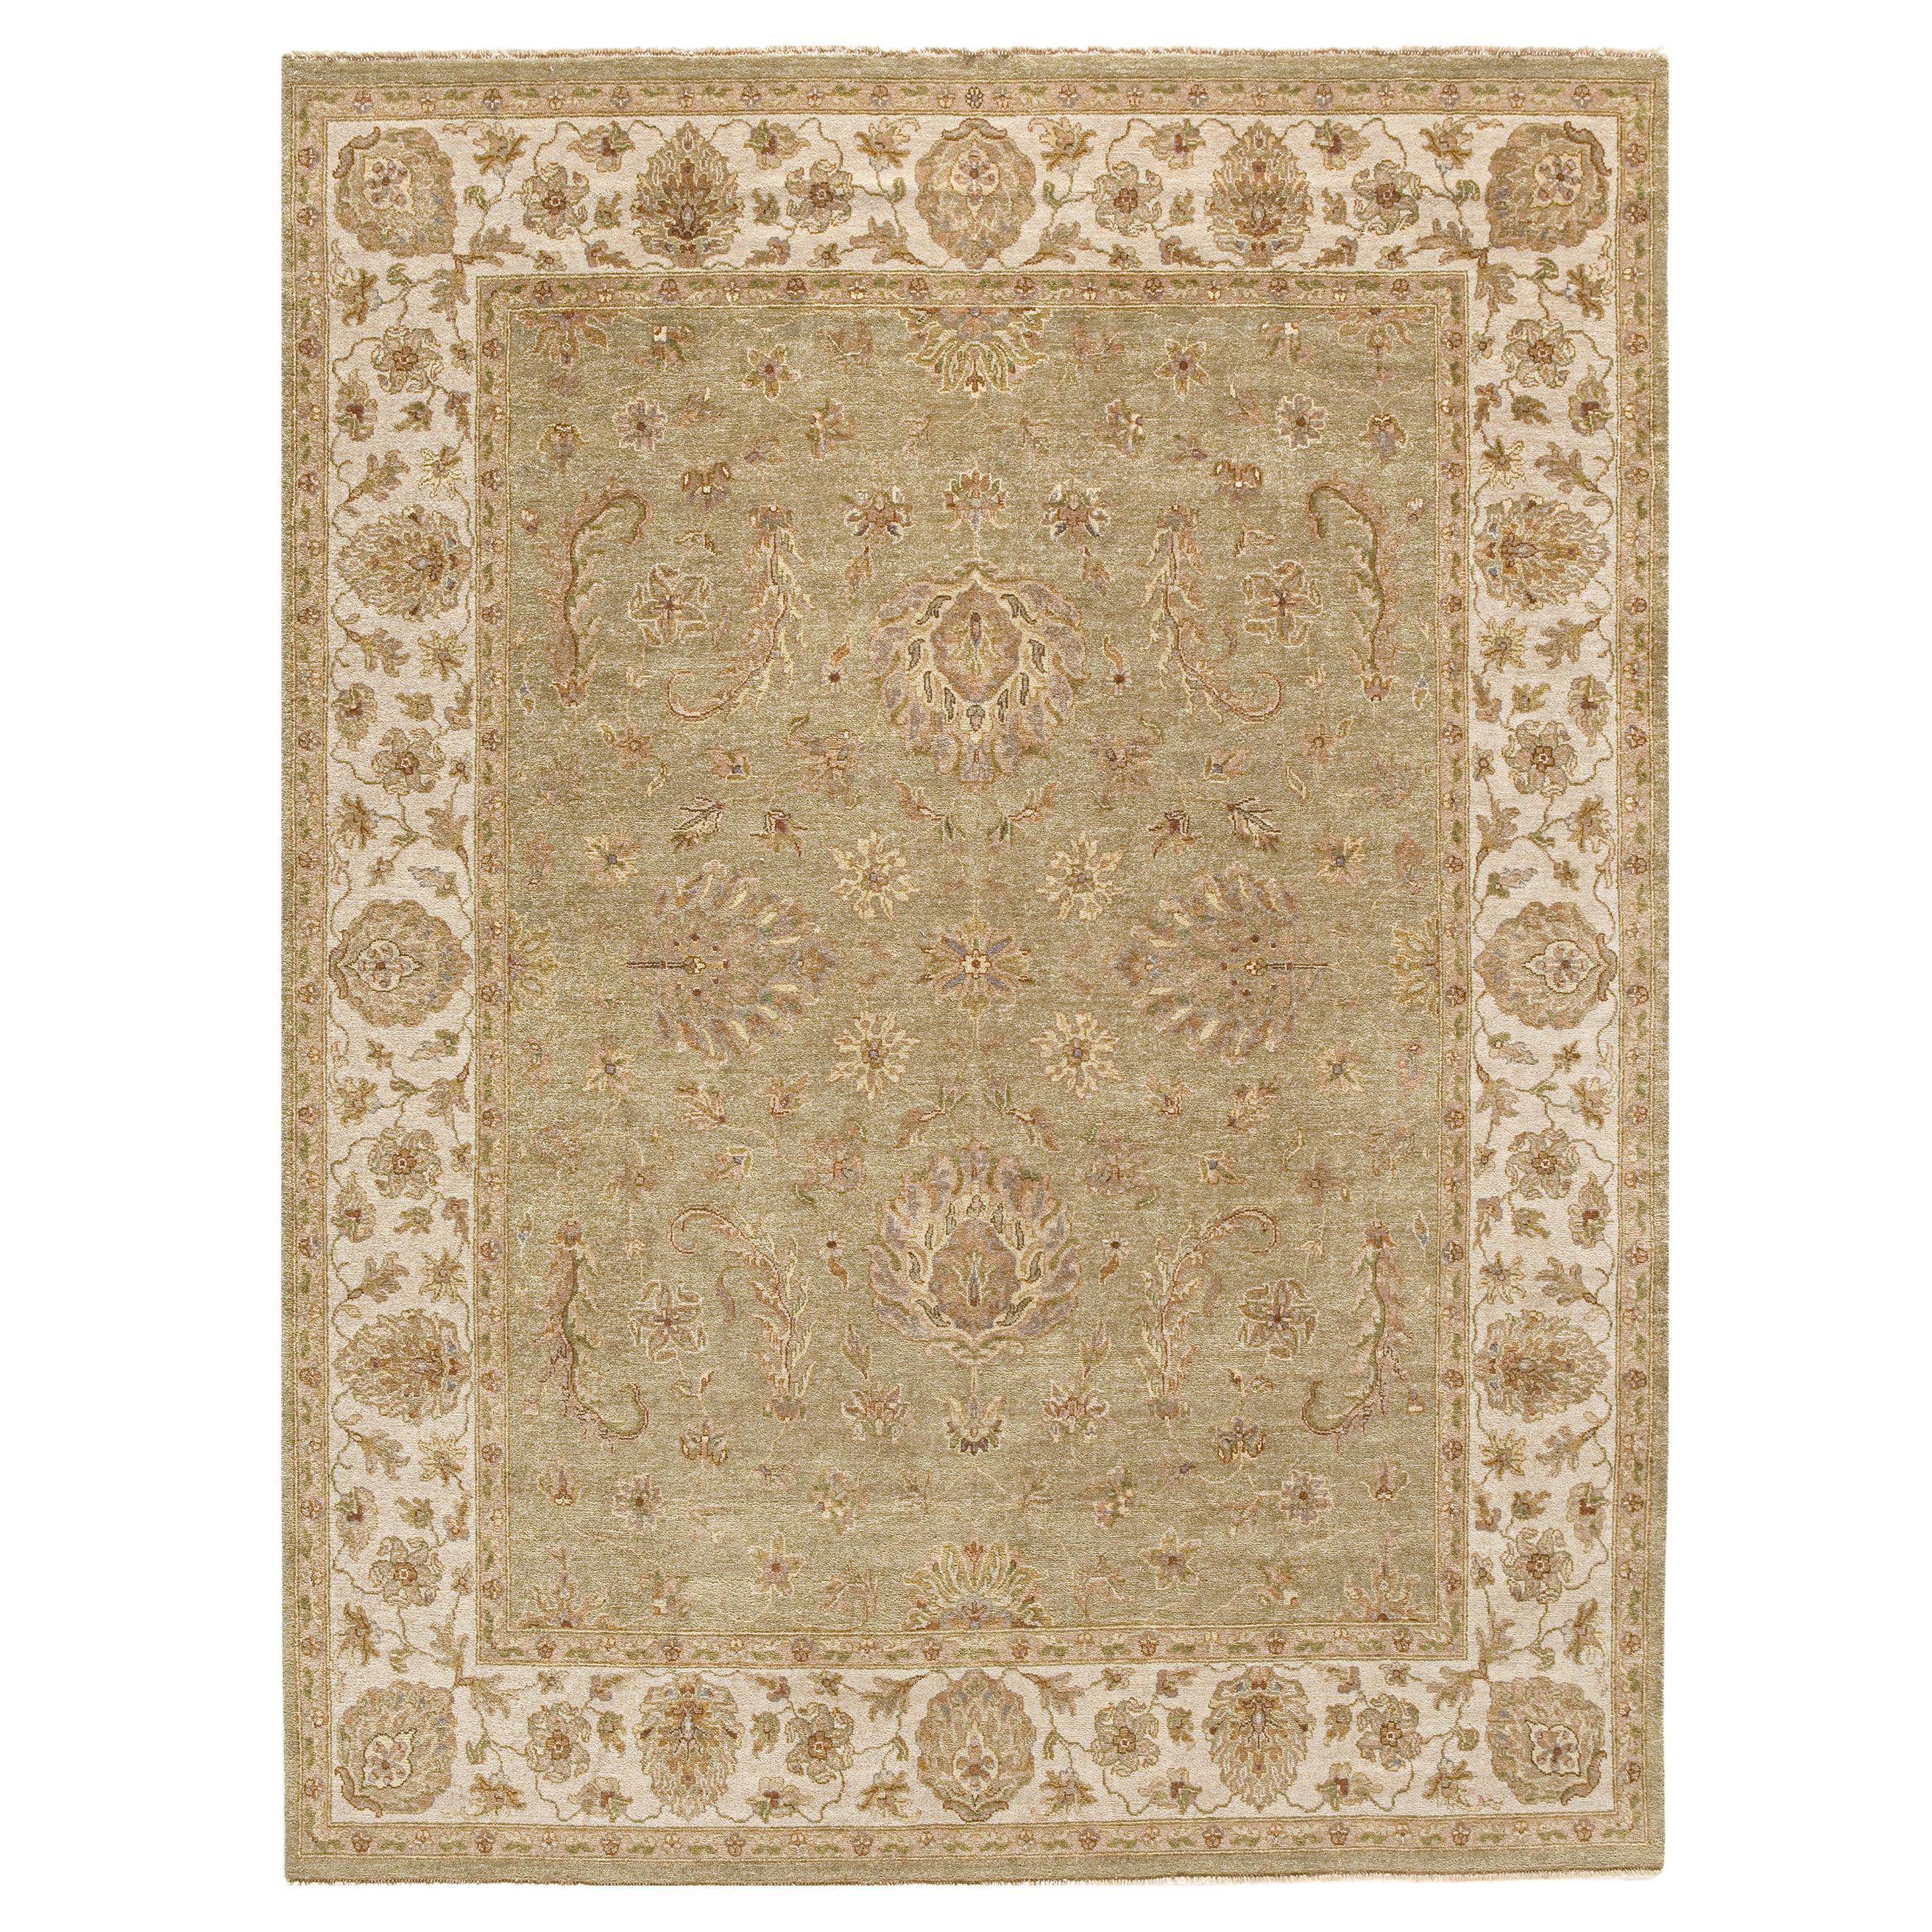 Luxury Traditional Hand-Knotted Amritsar Agra Lt. Green/Ivory 12x24 Rug